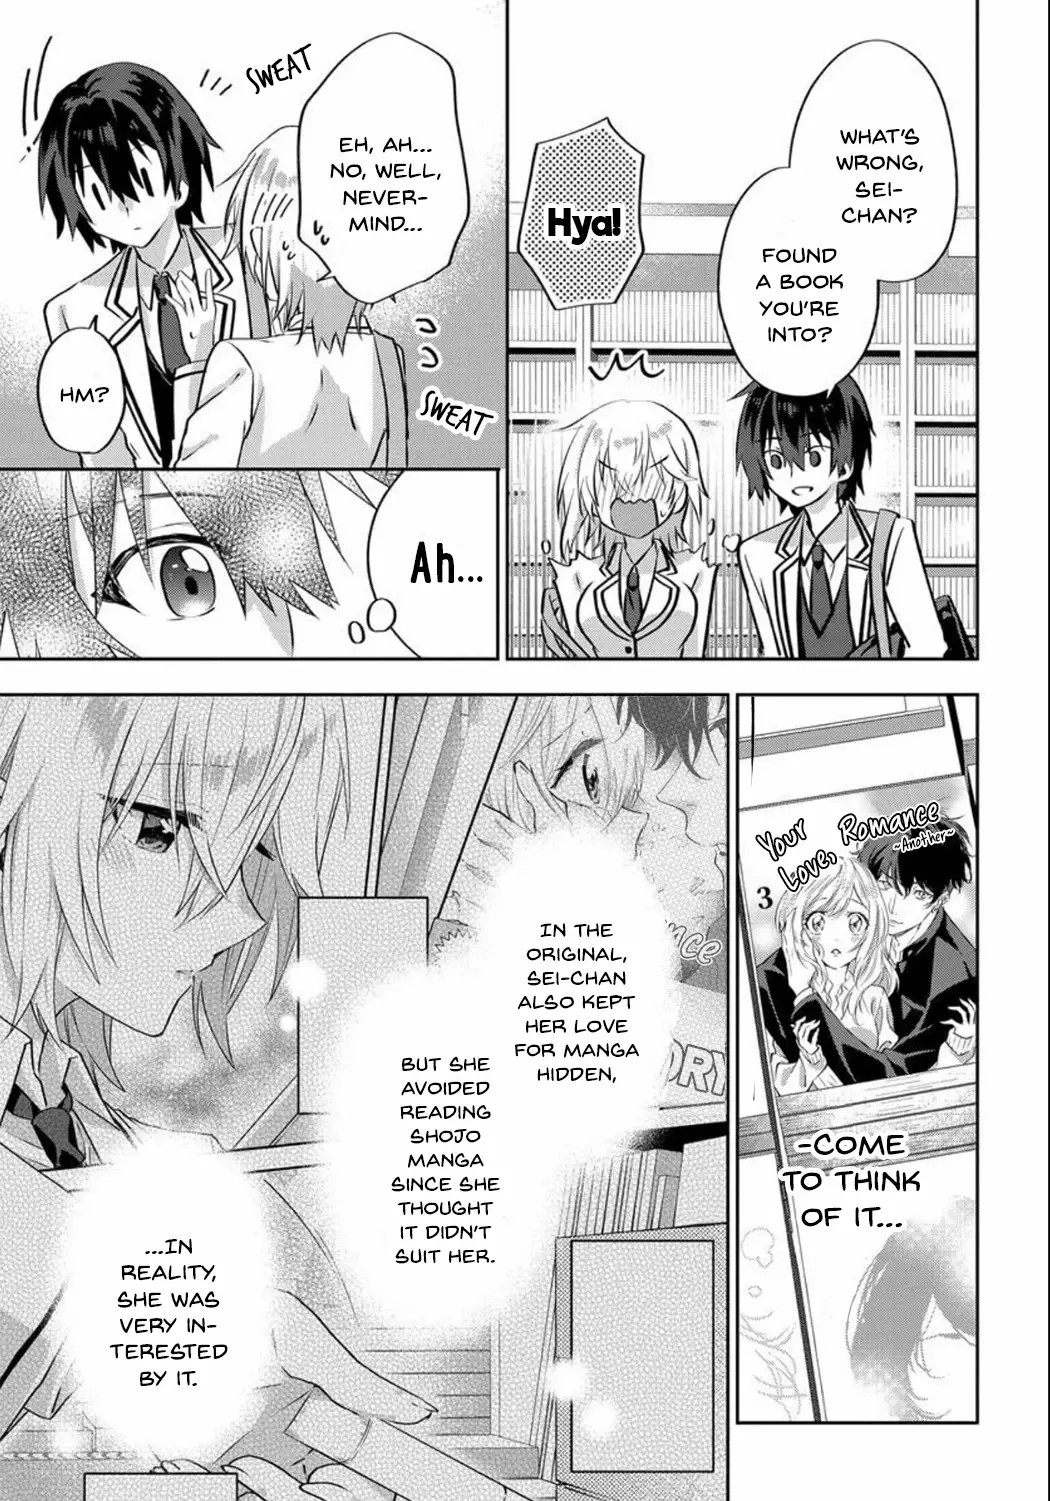 Since I’Ve Entered The World Of Romantic Comedy Manga, I’Ll Do My Best To Make The Losing Heroine Happy - 5.1 page 7-5087dbbd